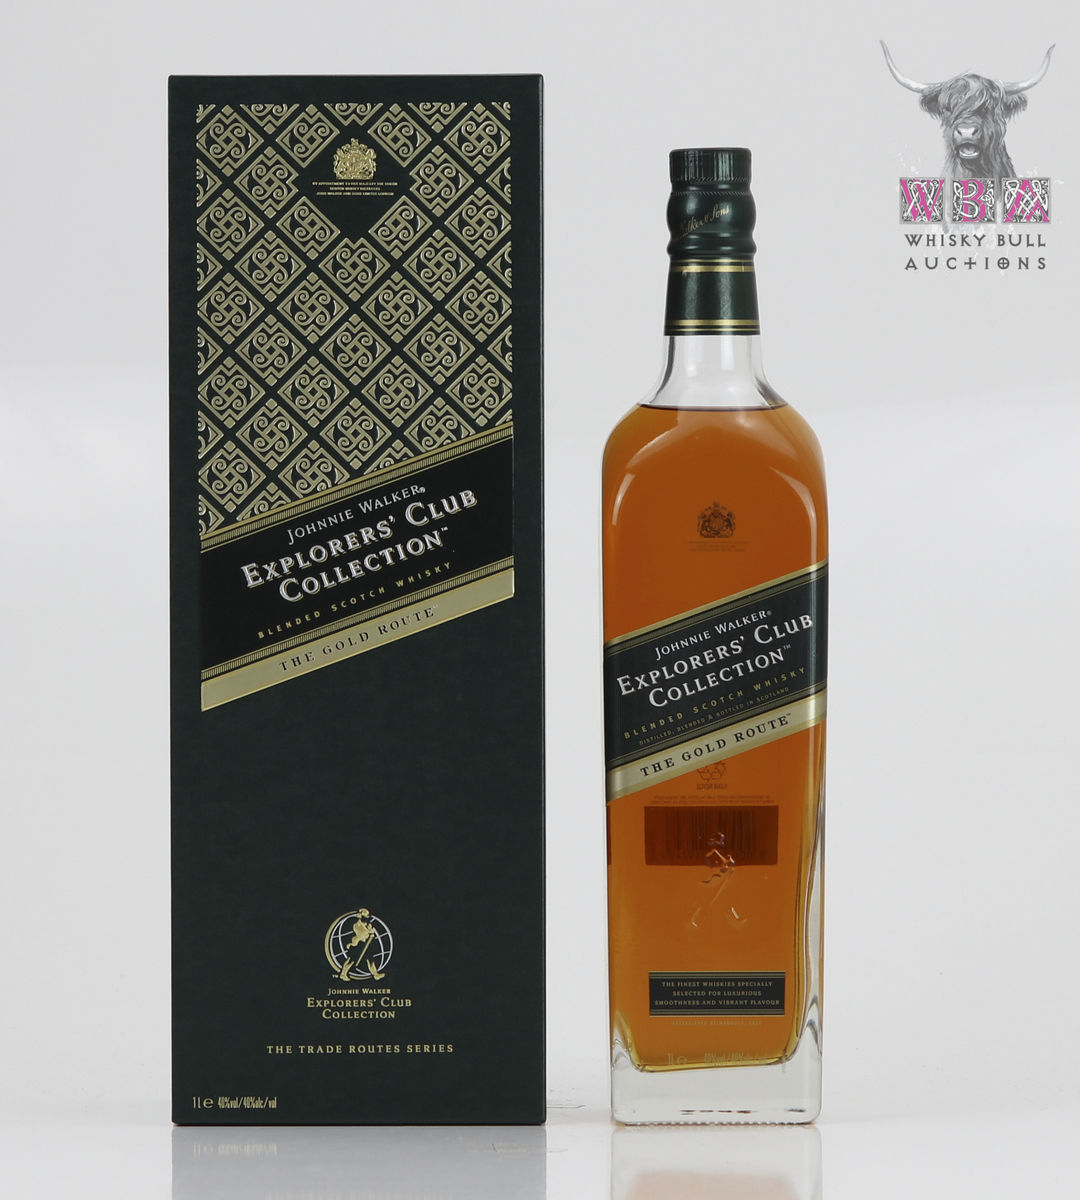 Johnnie Walker Explorers Club Collection - The Gold Route 1L Auction |  Whisky Bull